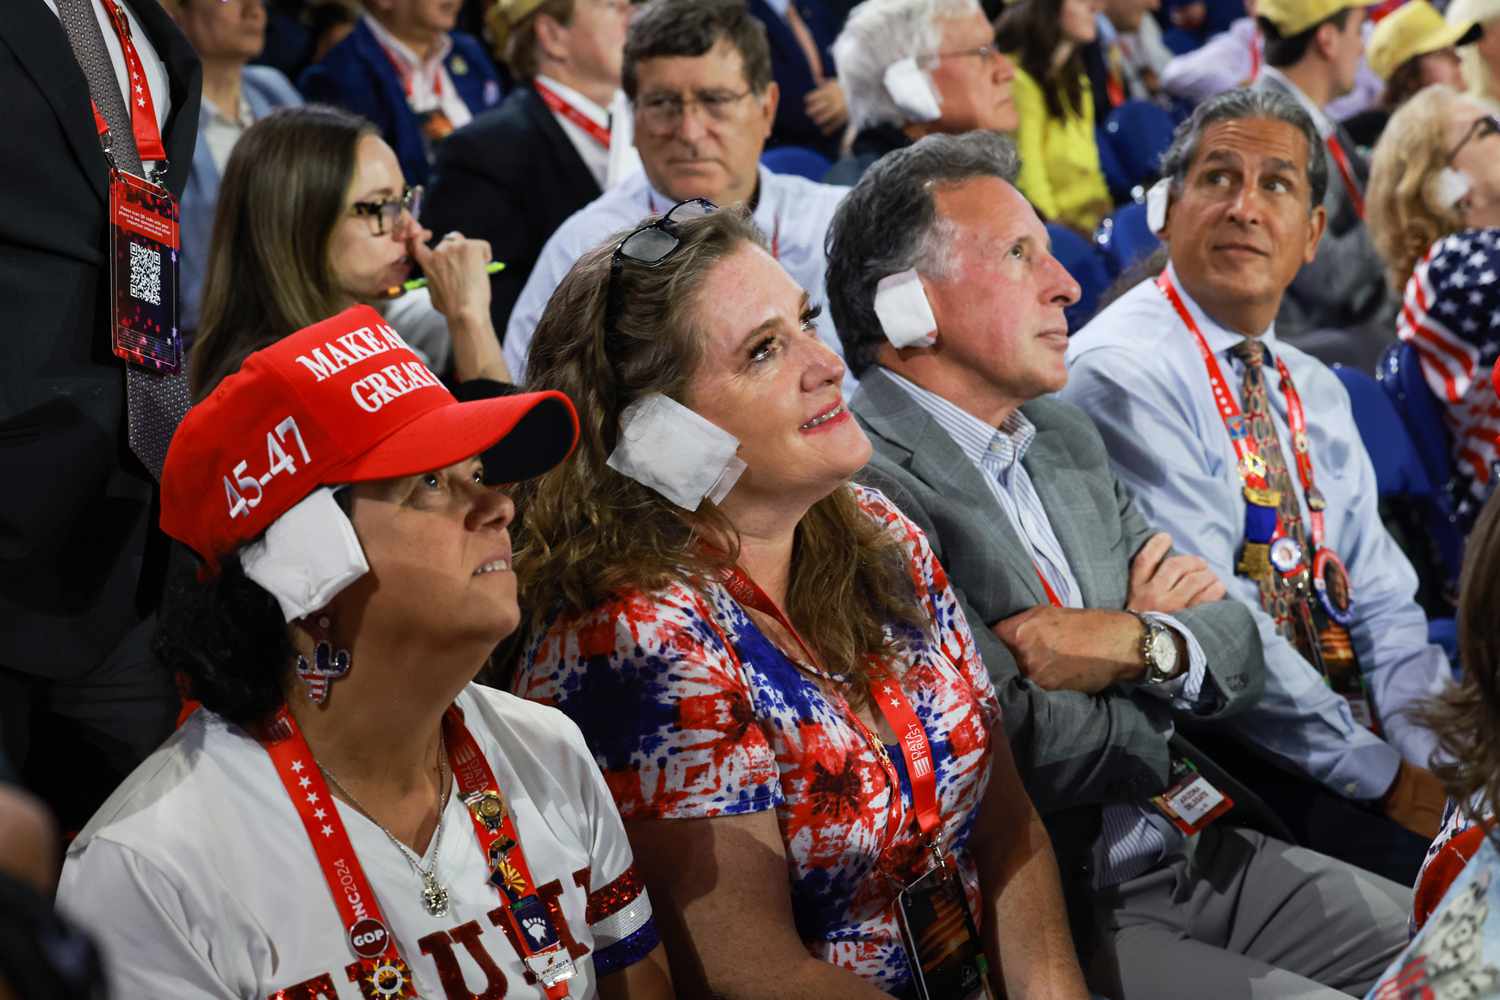 Parents of Parkland Victims Share Outrage That People Wore Fake Ear Bandages at RNC: ‘They Are Milking This’